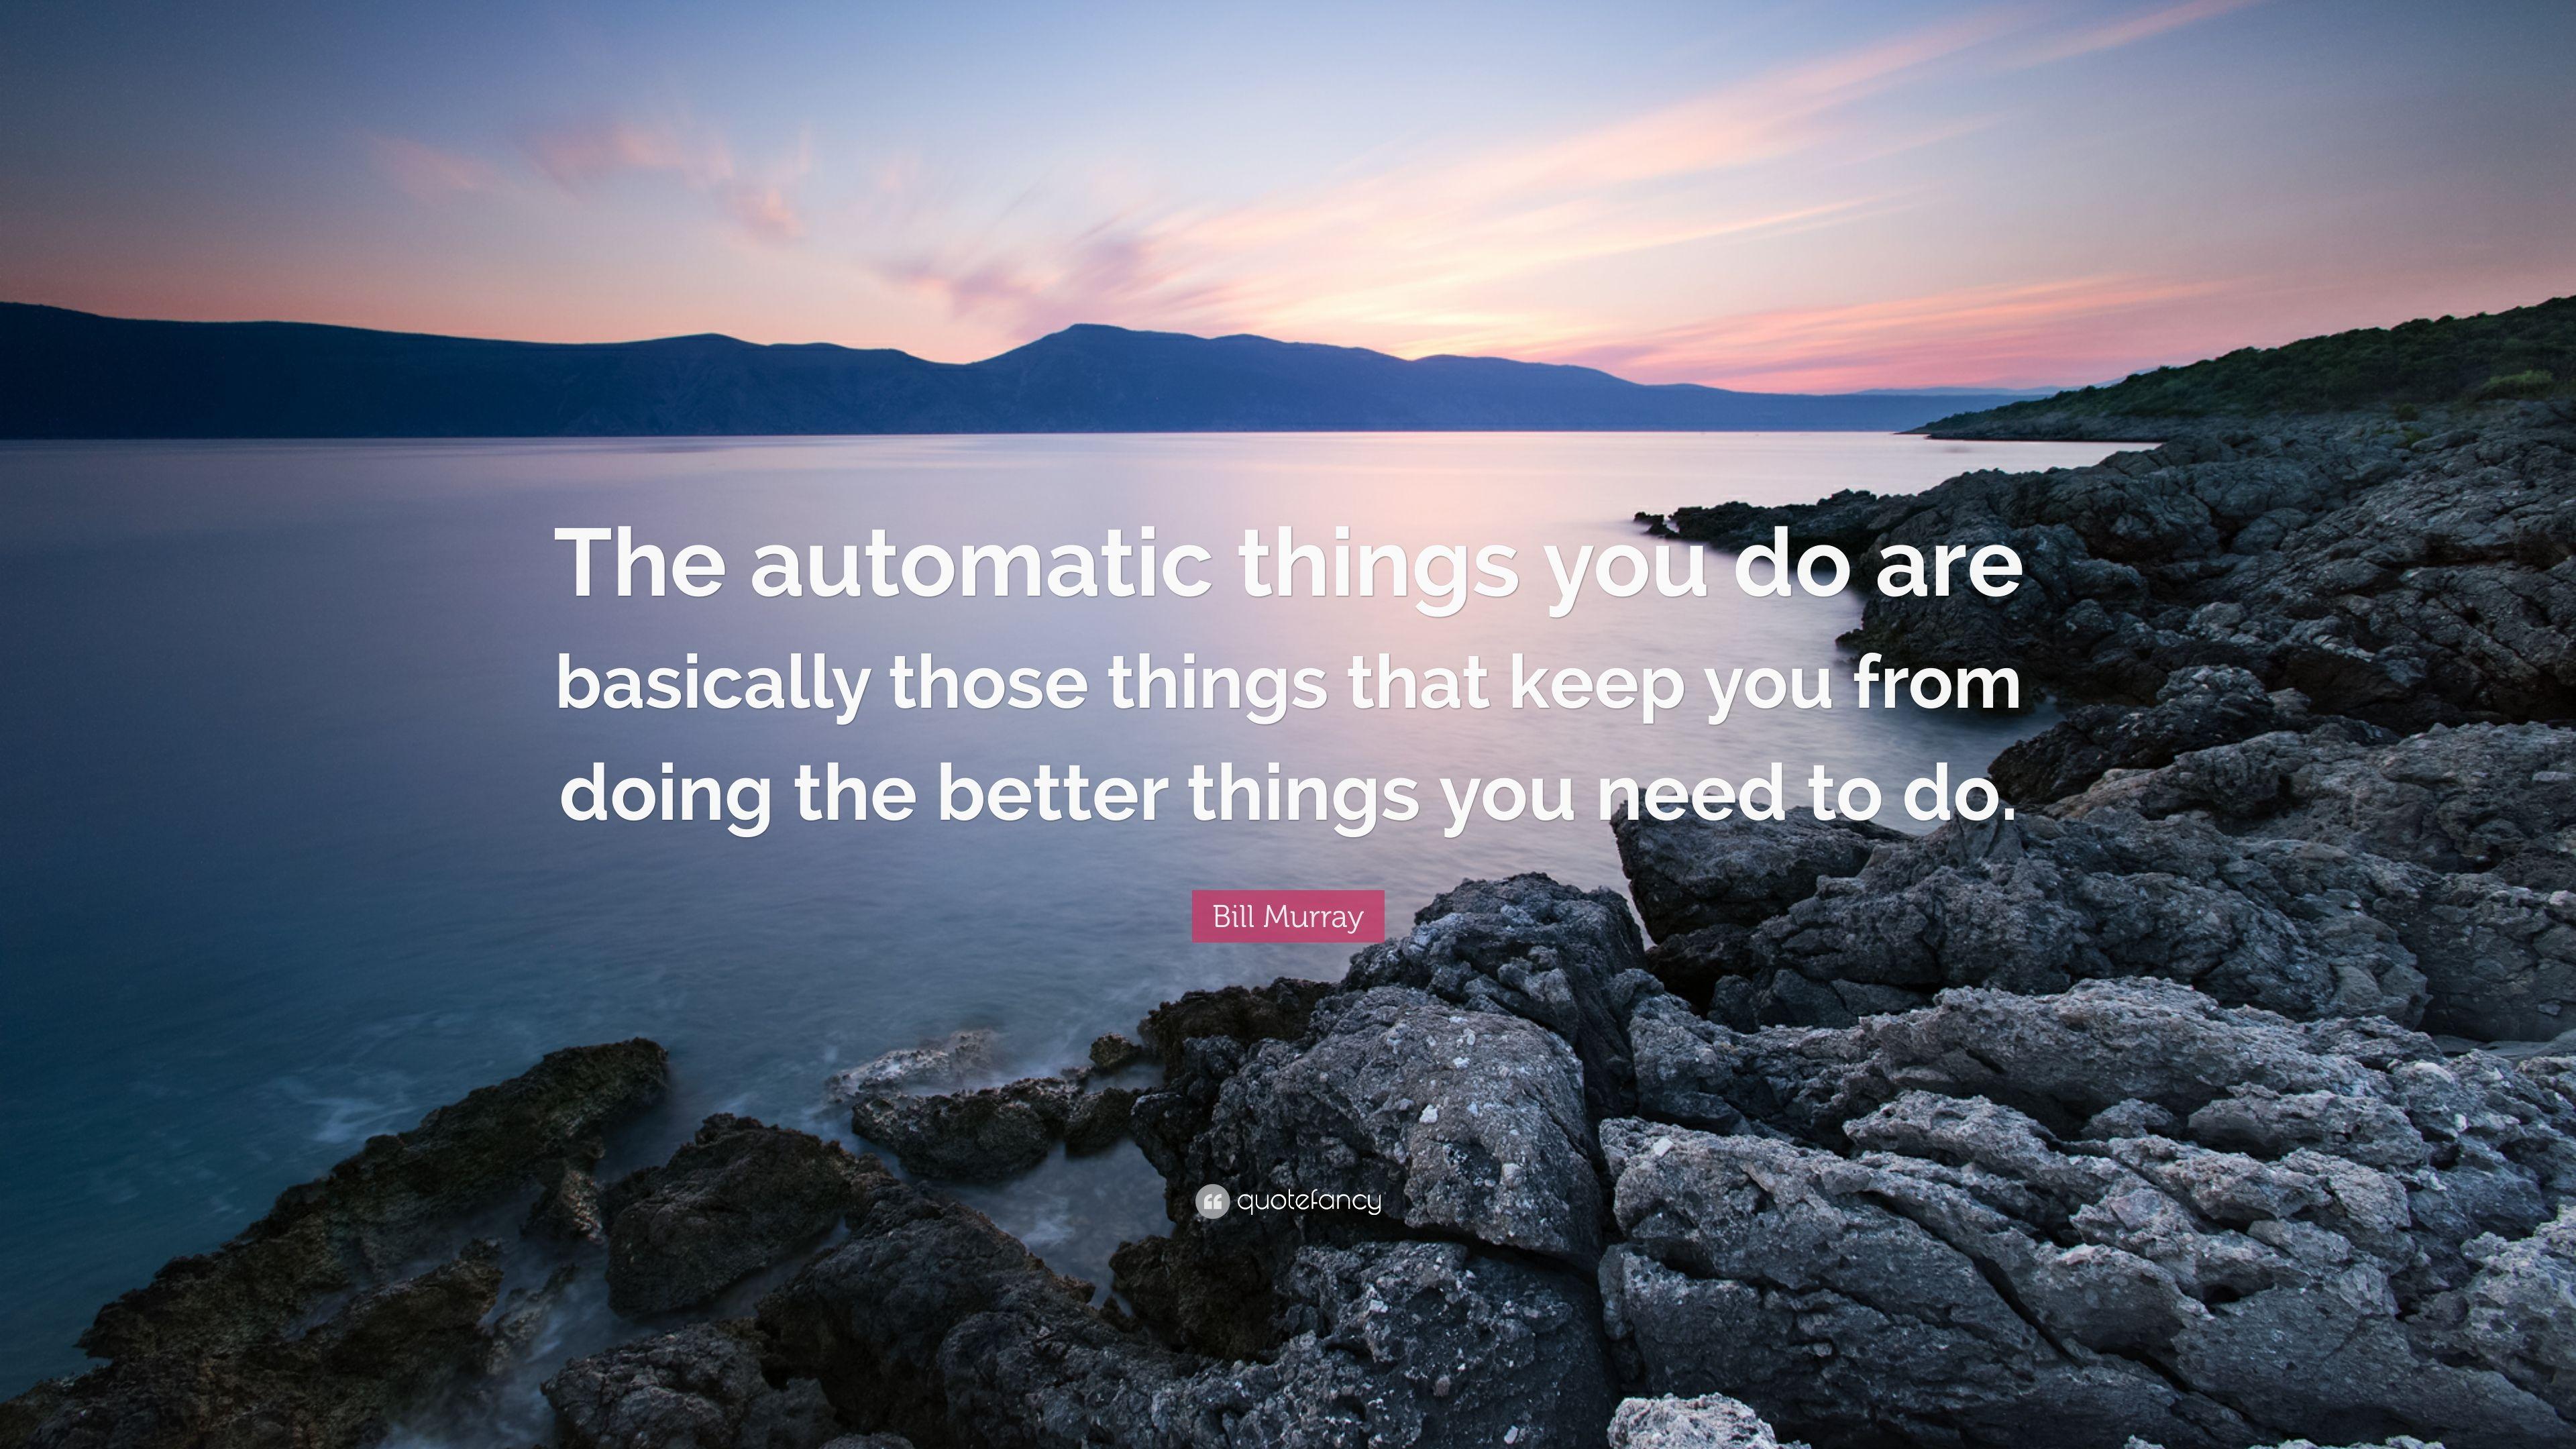 Bill Murray Quote: “The automatic things you do are basically